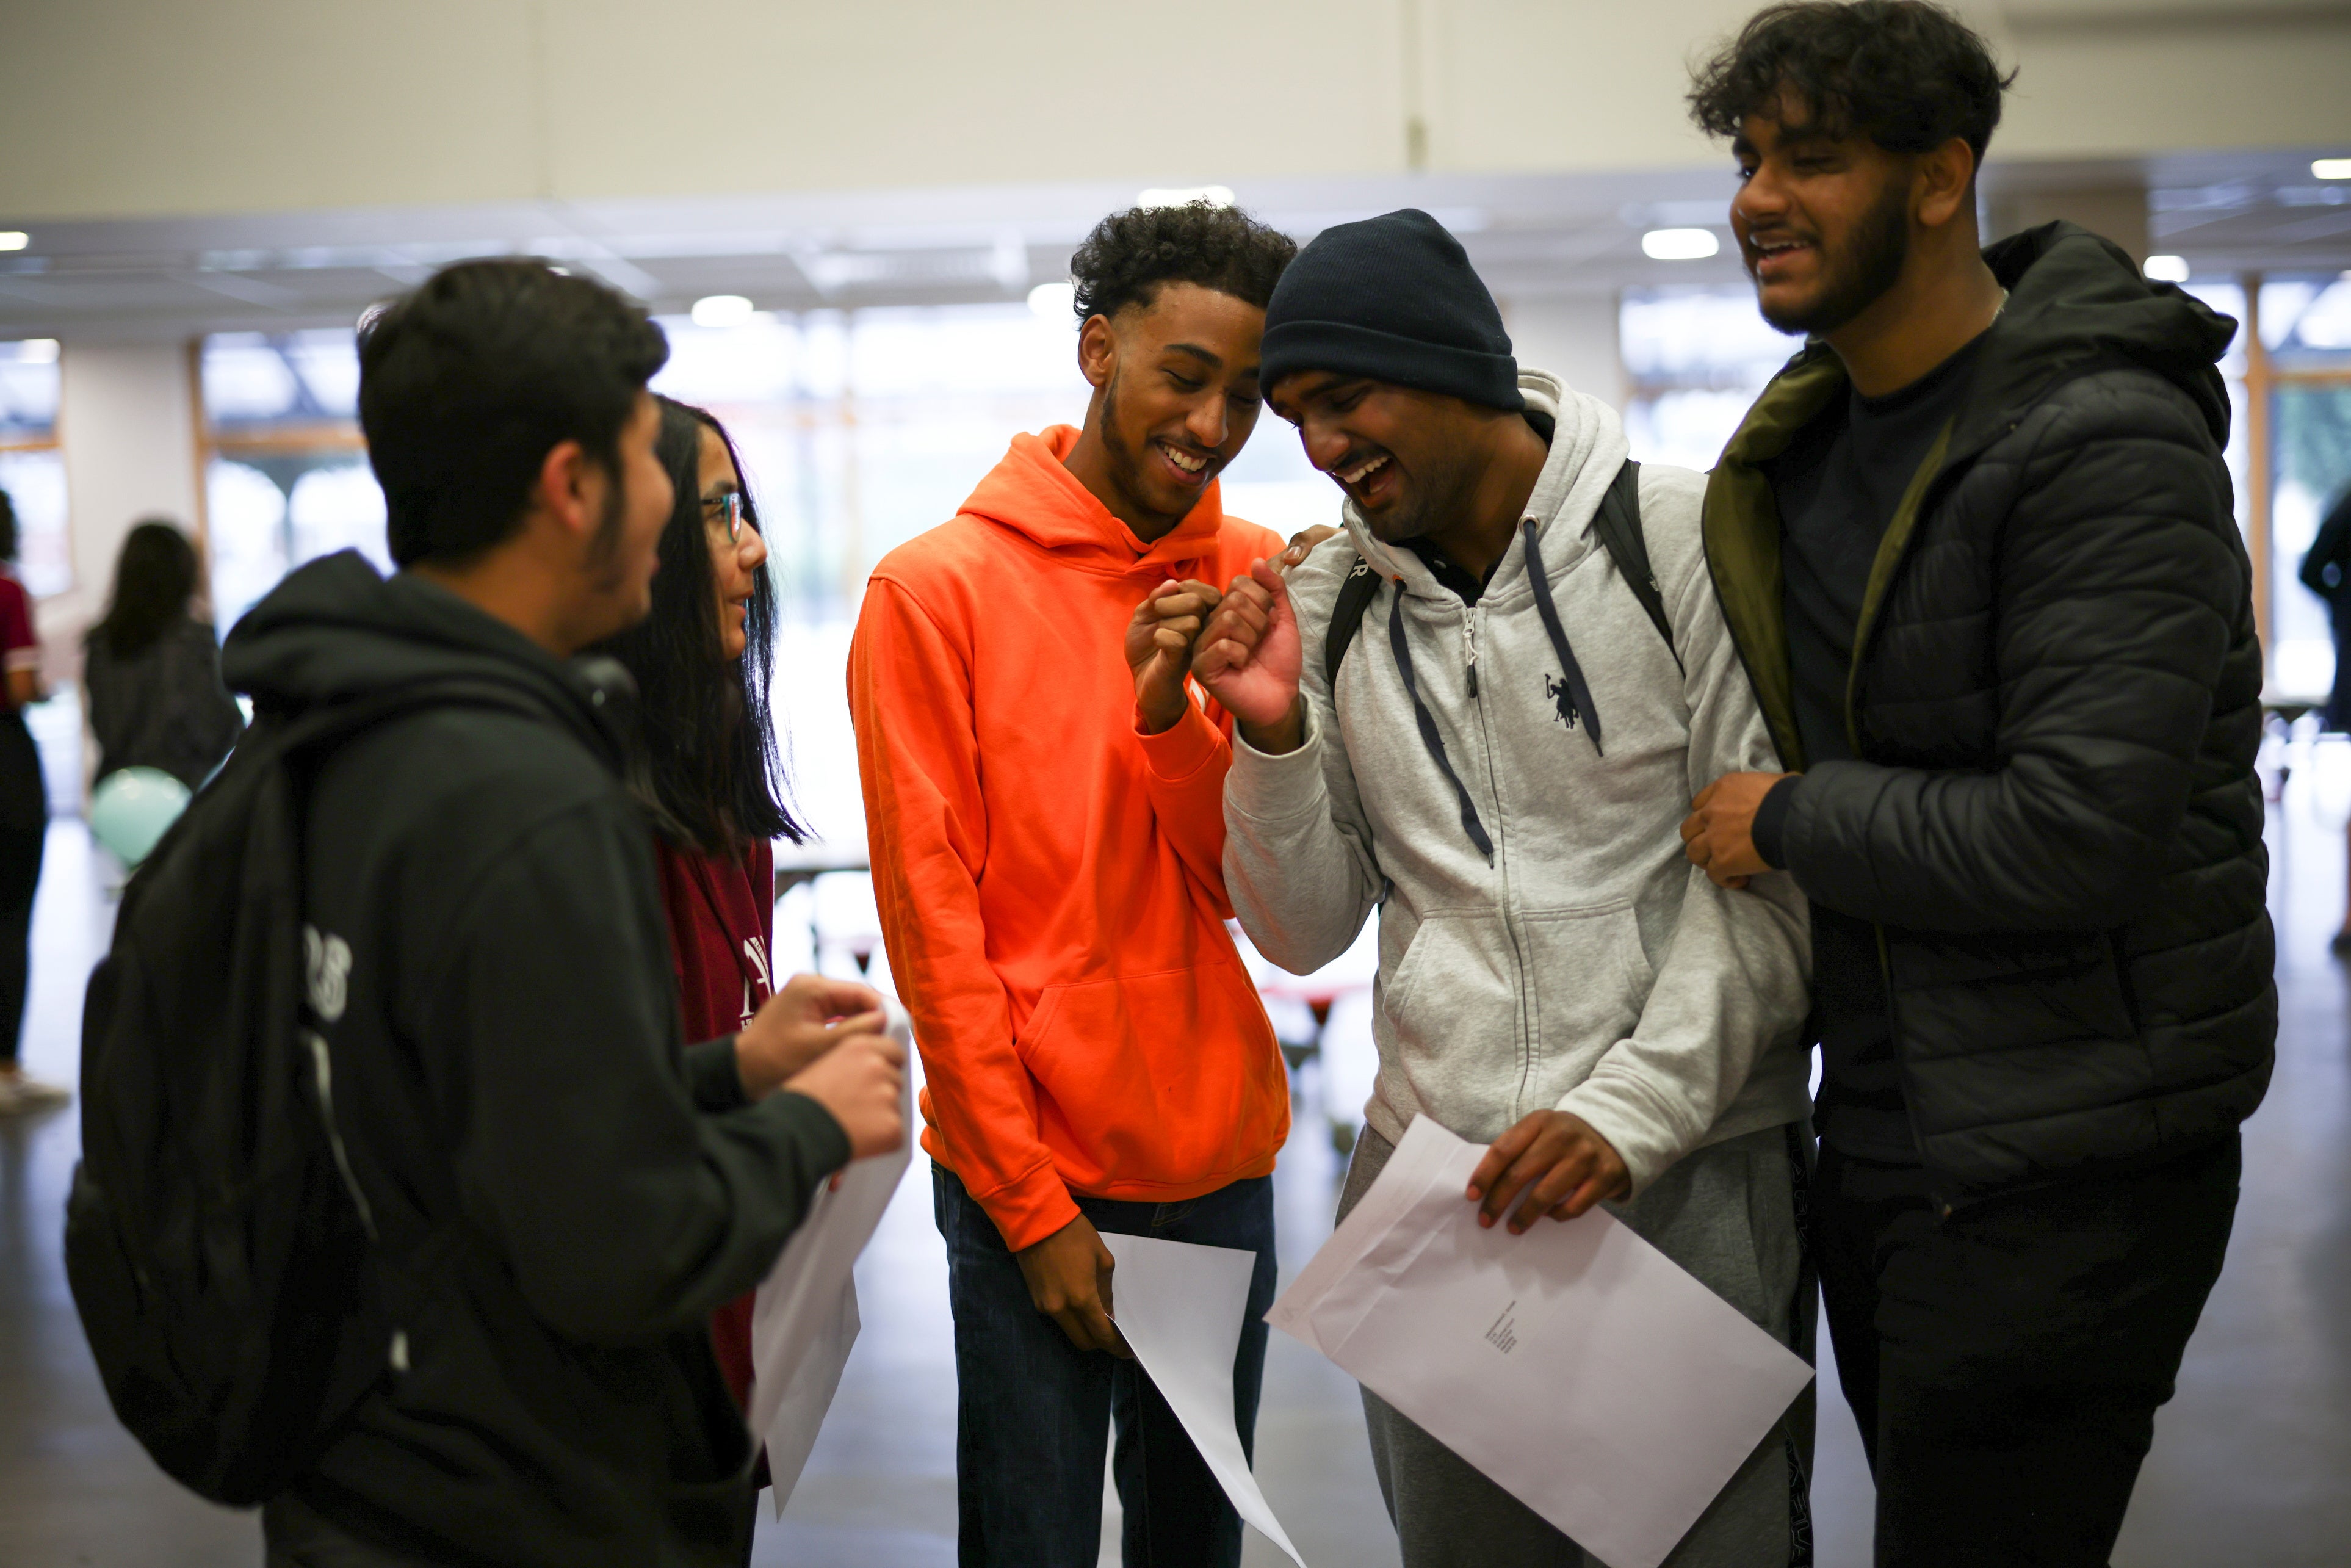 Students react after they receive their A-Level results at the Ark Academy, in London on Tuesday